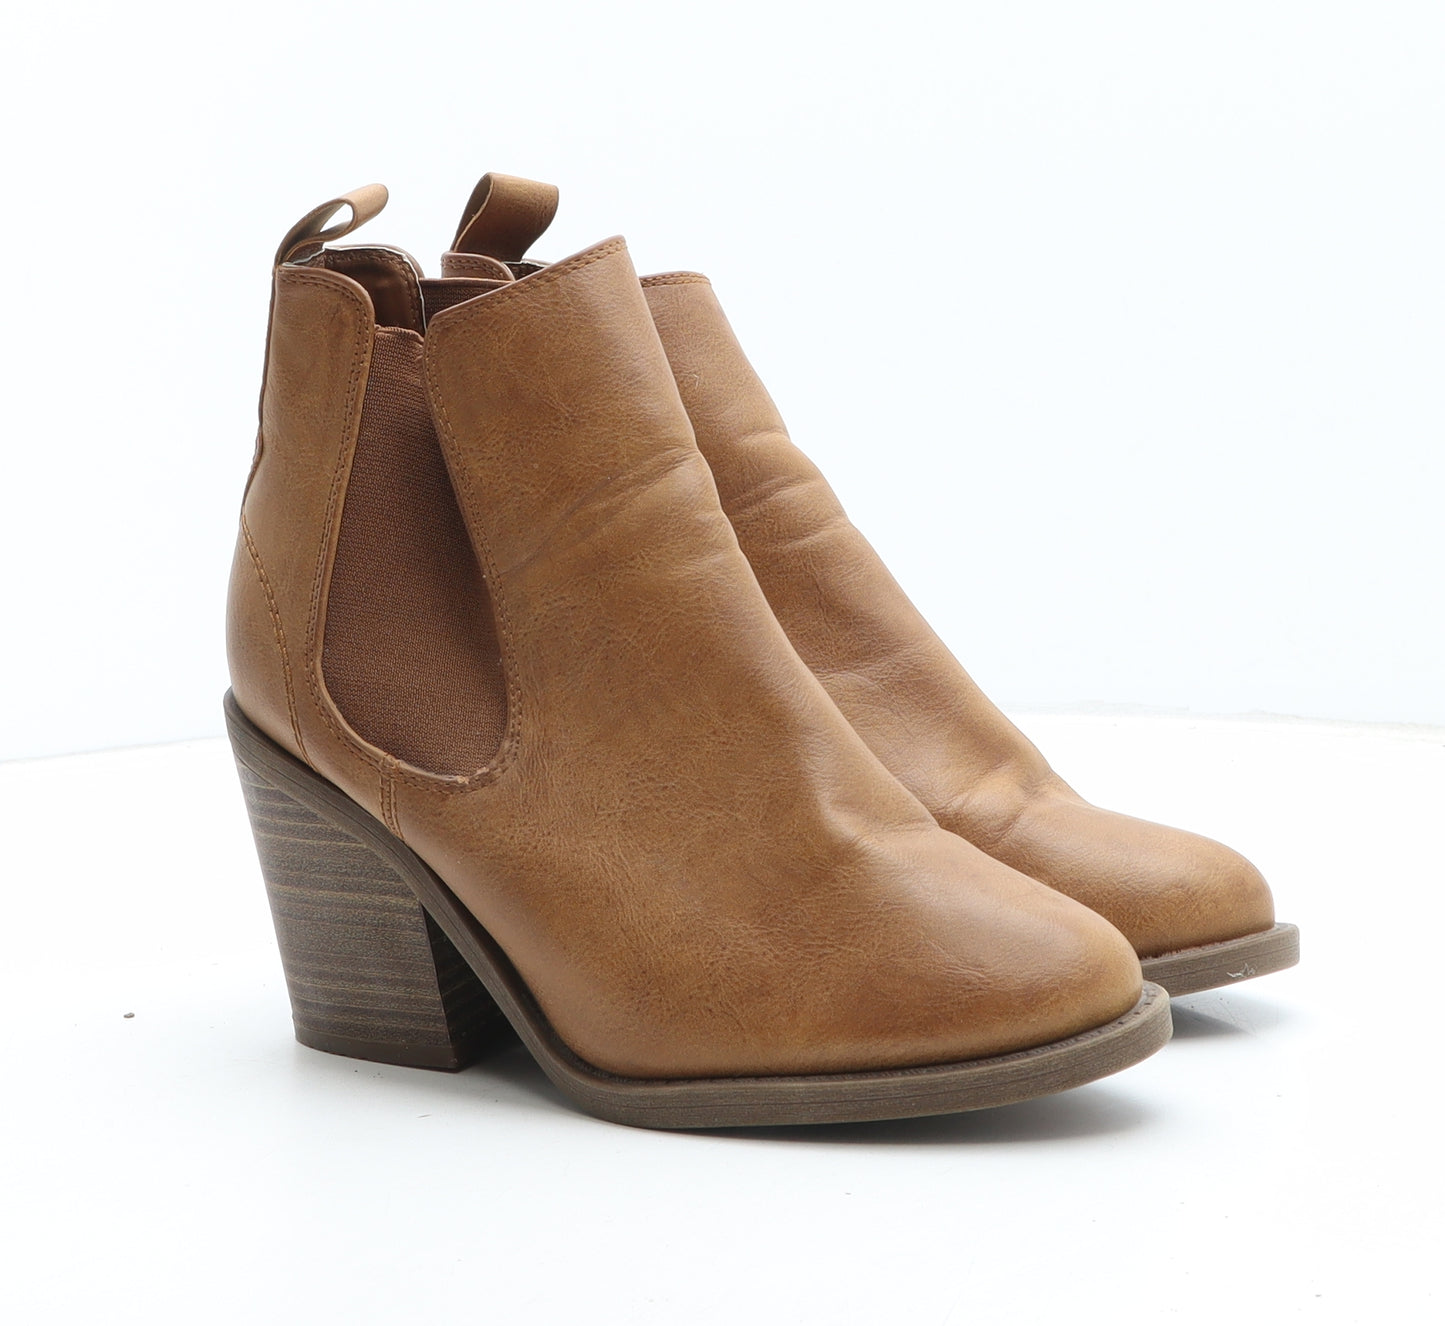 New Look Womens Brown Synthetic Chelsea Boot UK